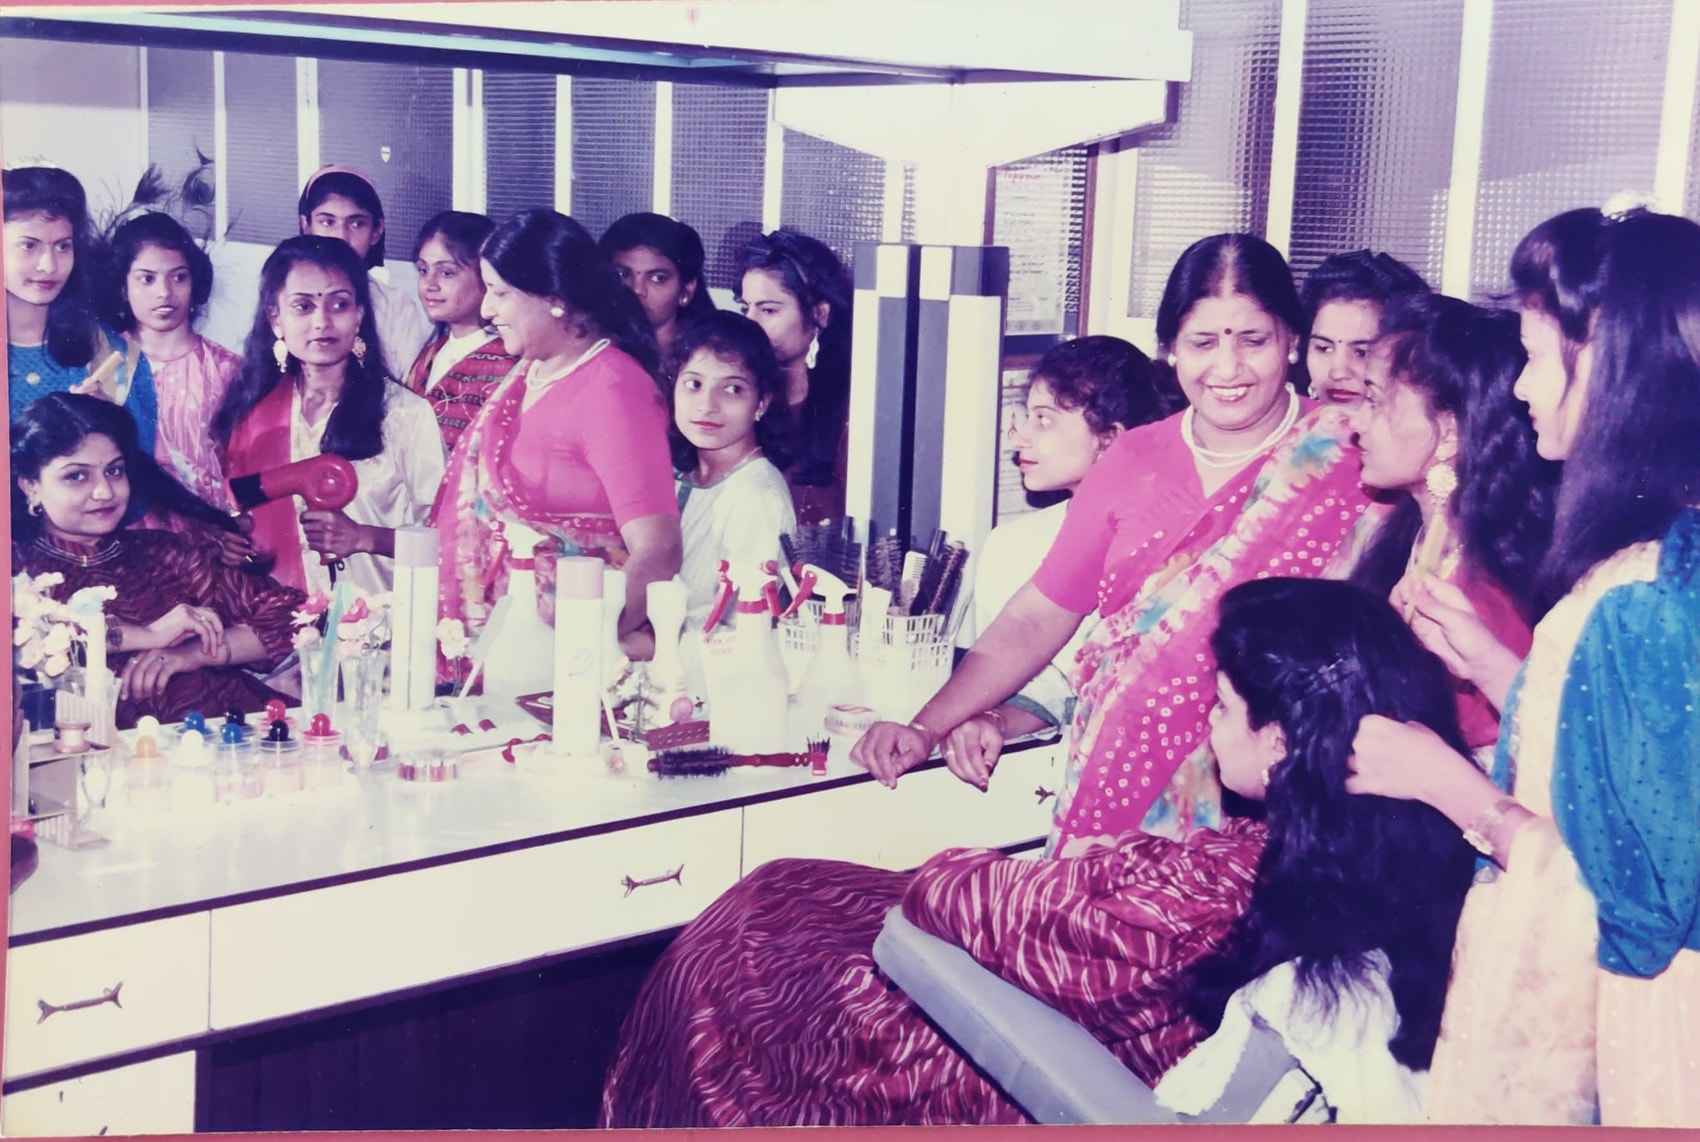 Monisha has been training the women of Ujjain in makeup, skincare and other beauty services for 40 years now